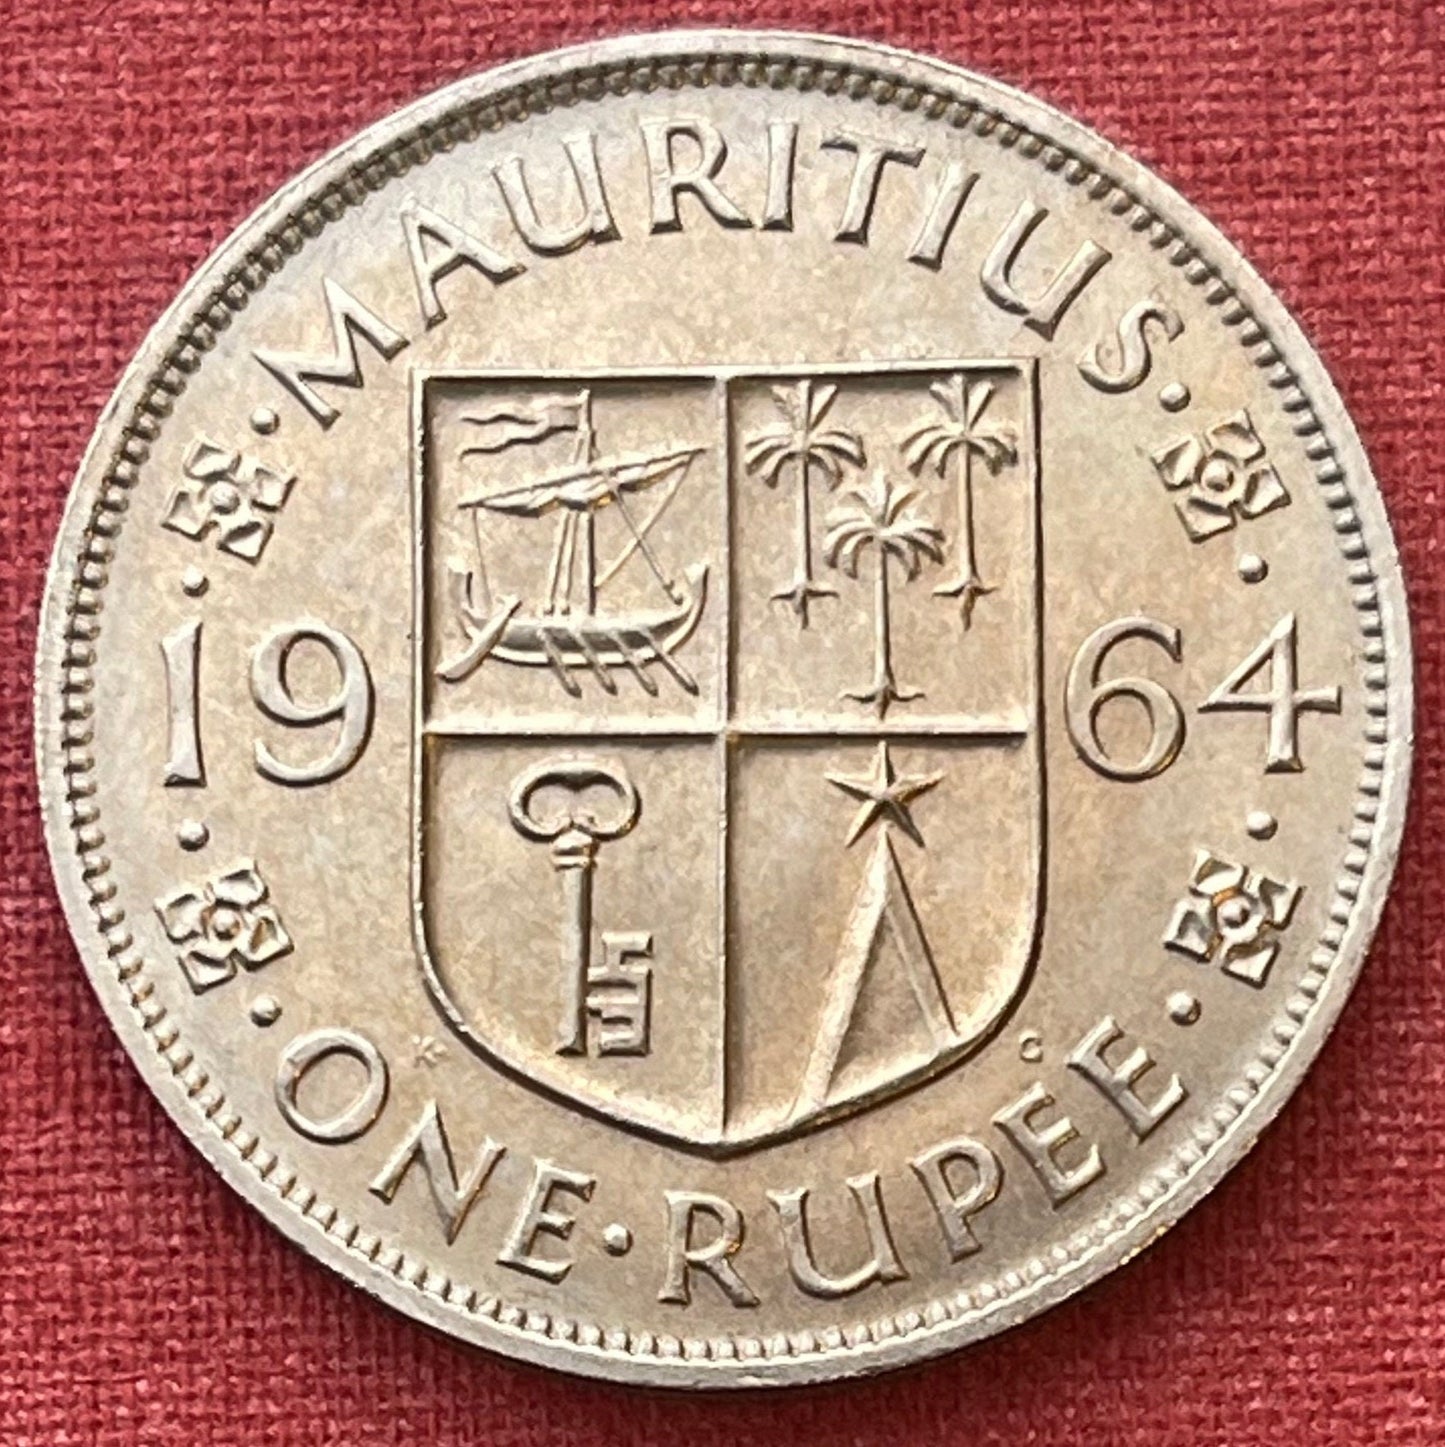 Galley, Palms, Key, Star 1 Rupee Mauritius Authentic Coin Money for Jewelry and Craft Making (Elizabeth II) (Tudor Crown) 1964